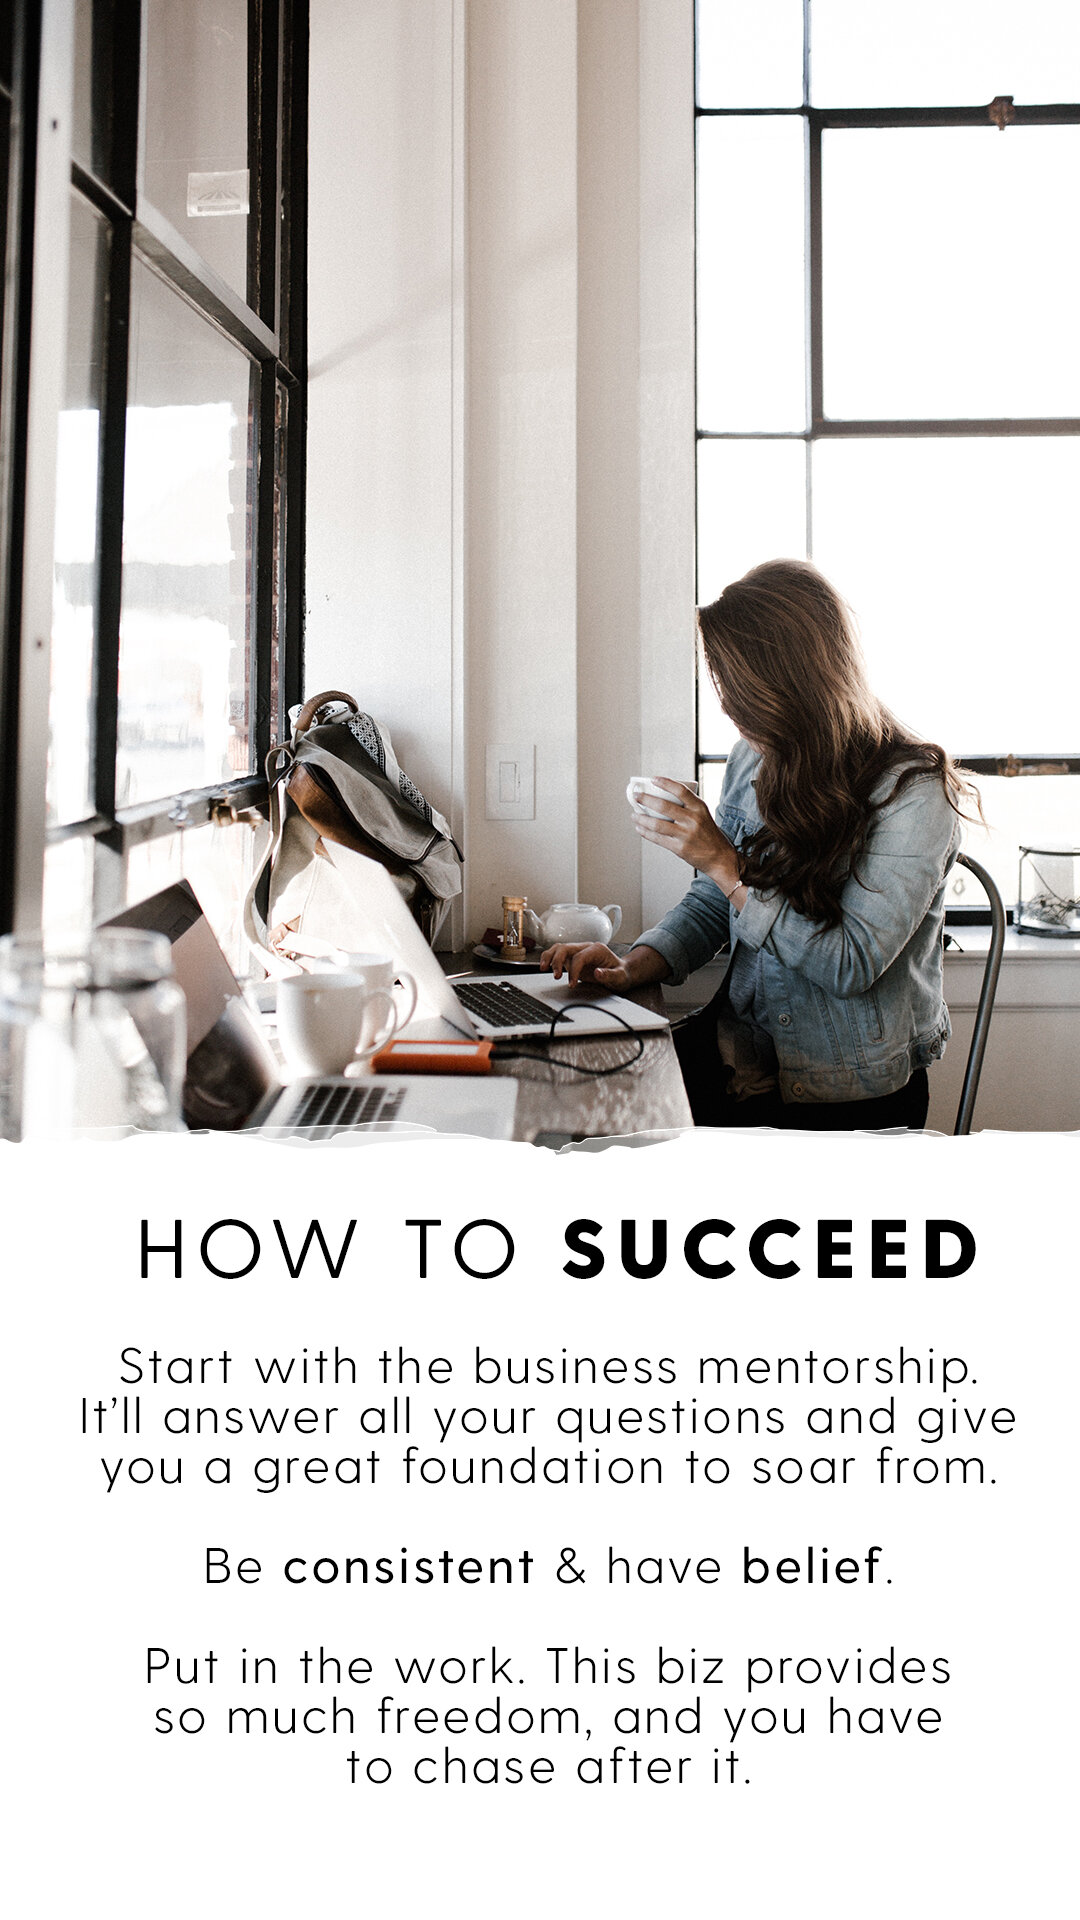 8-how to succeed.jpg